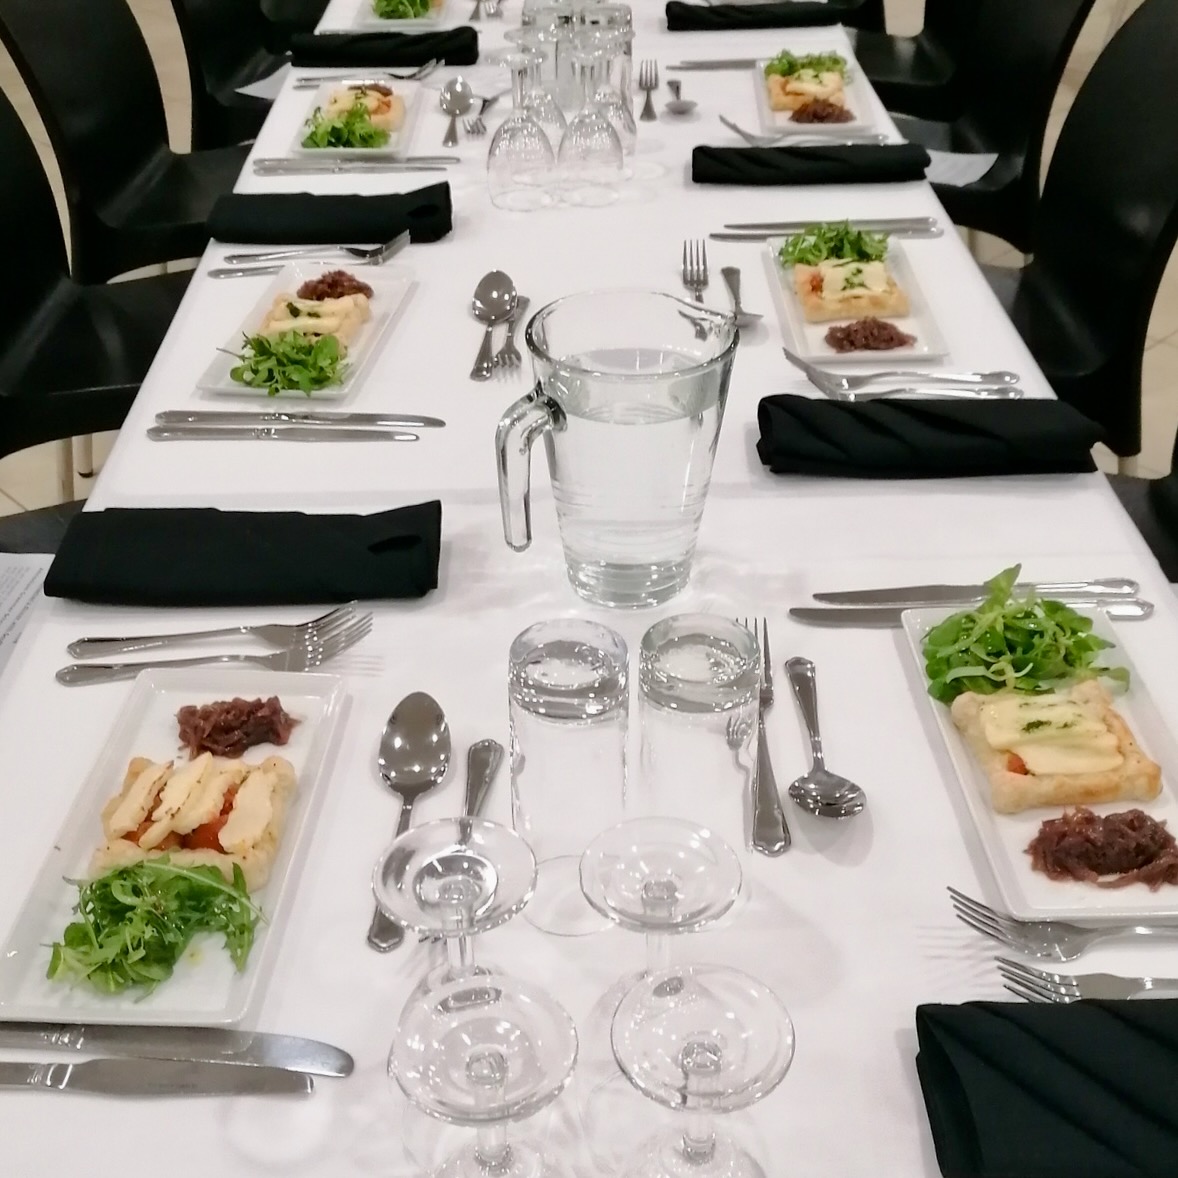 Another day, another fabulous evening catered by our team! Here’s a look back at the Sportsman’s dinner for Ashley Cricket Club. A great evening had by all! 🍽️